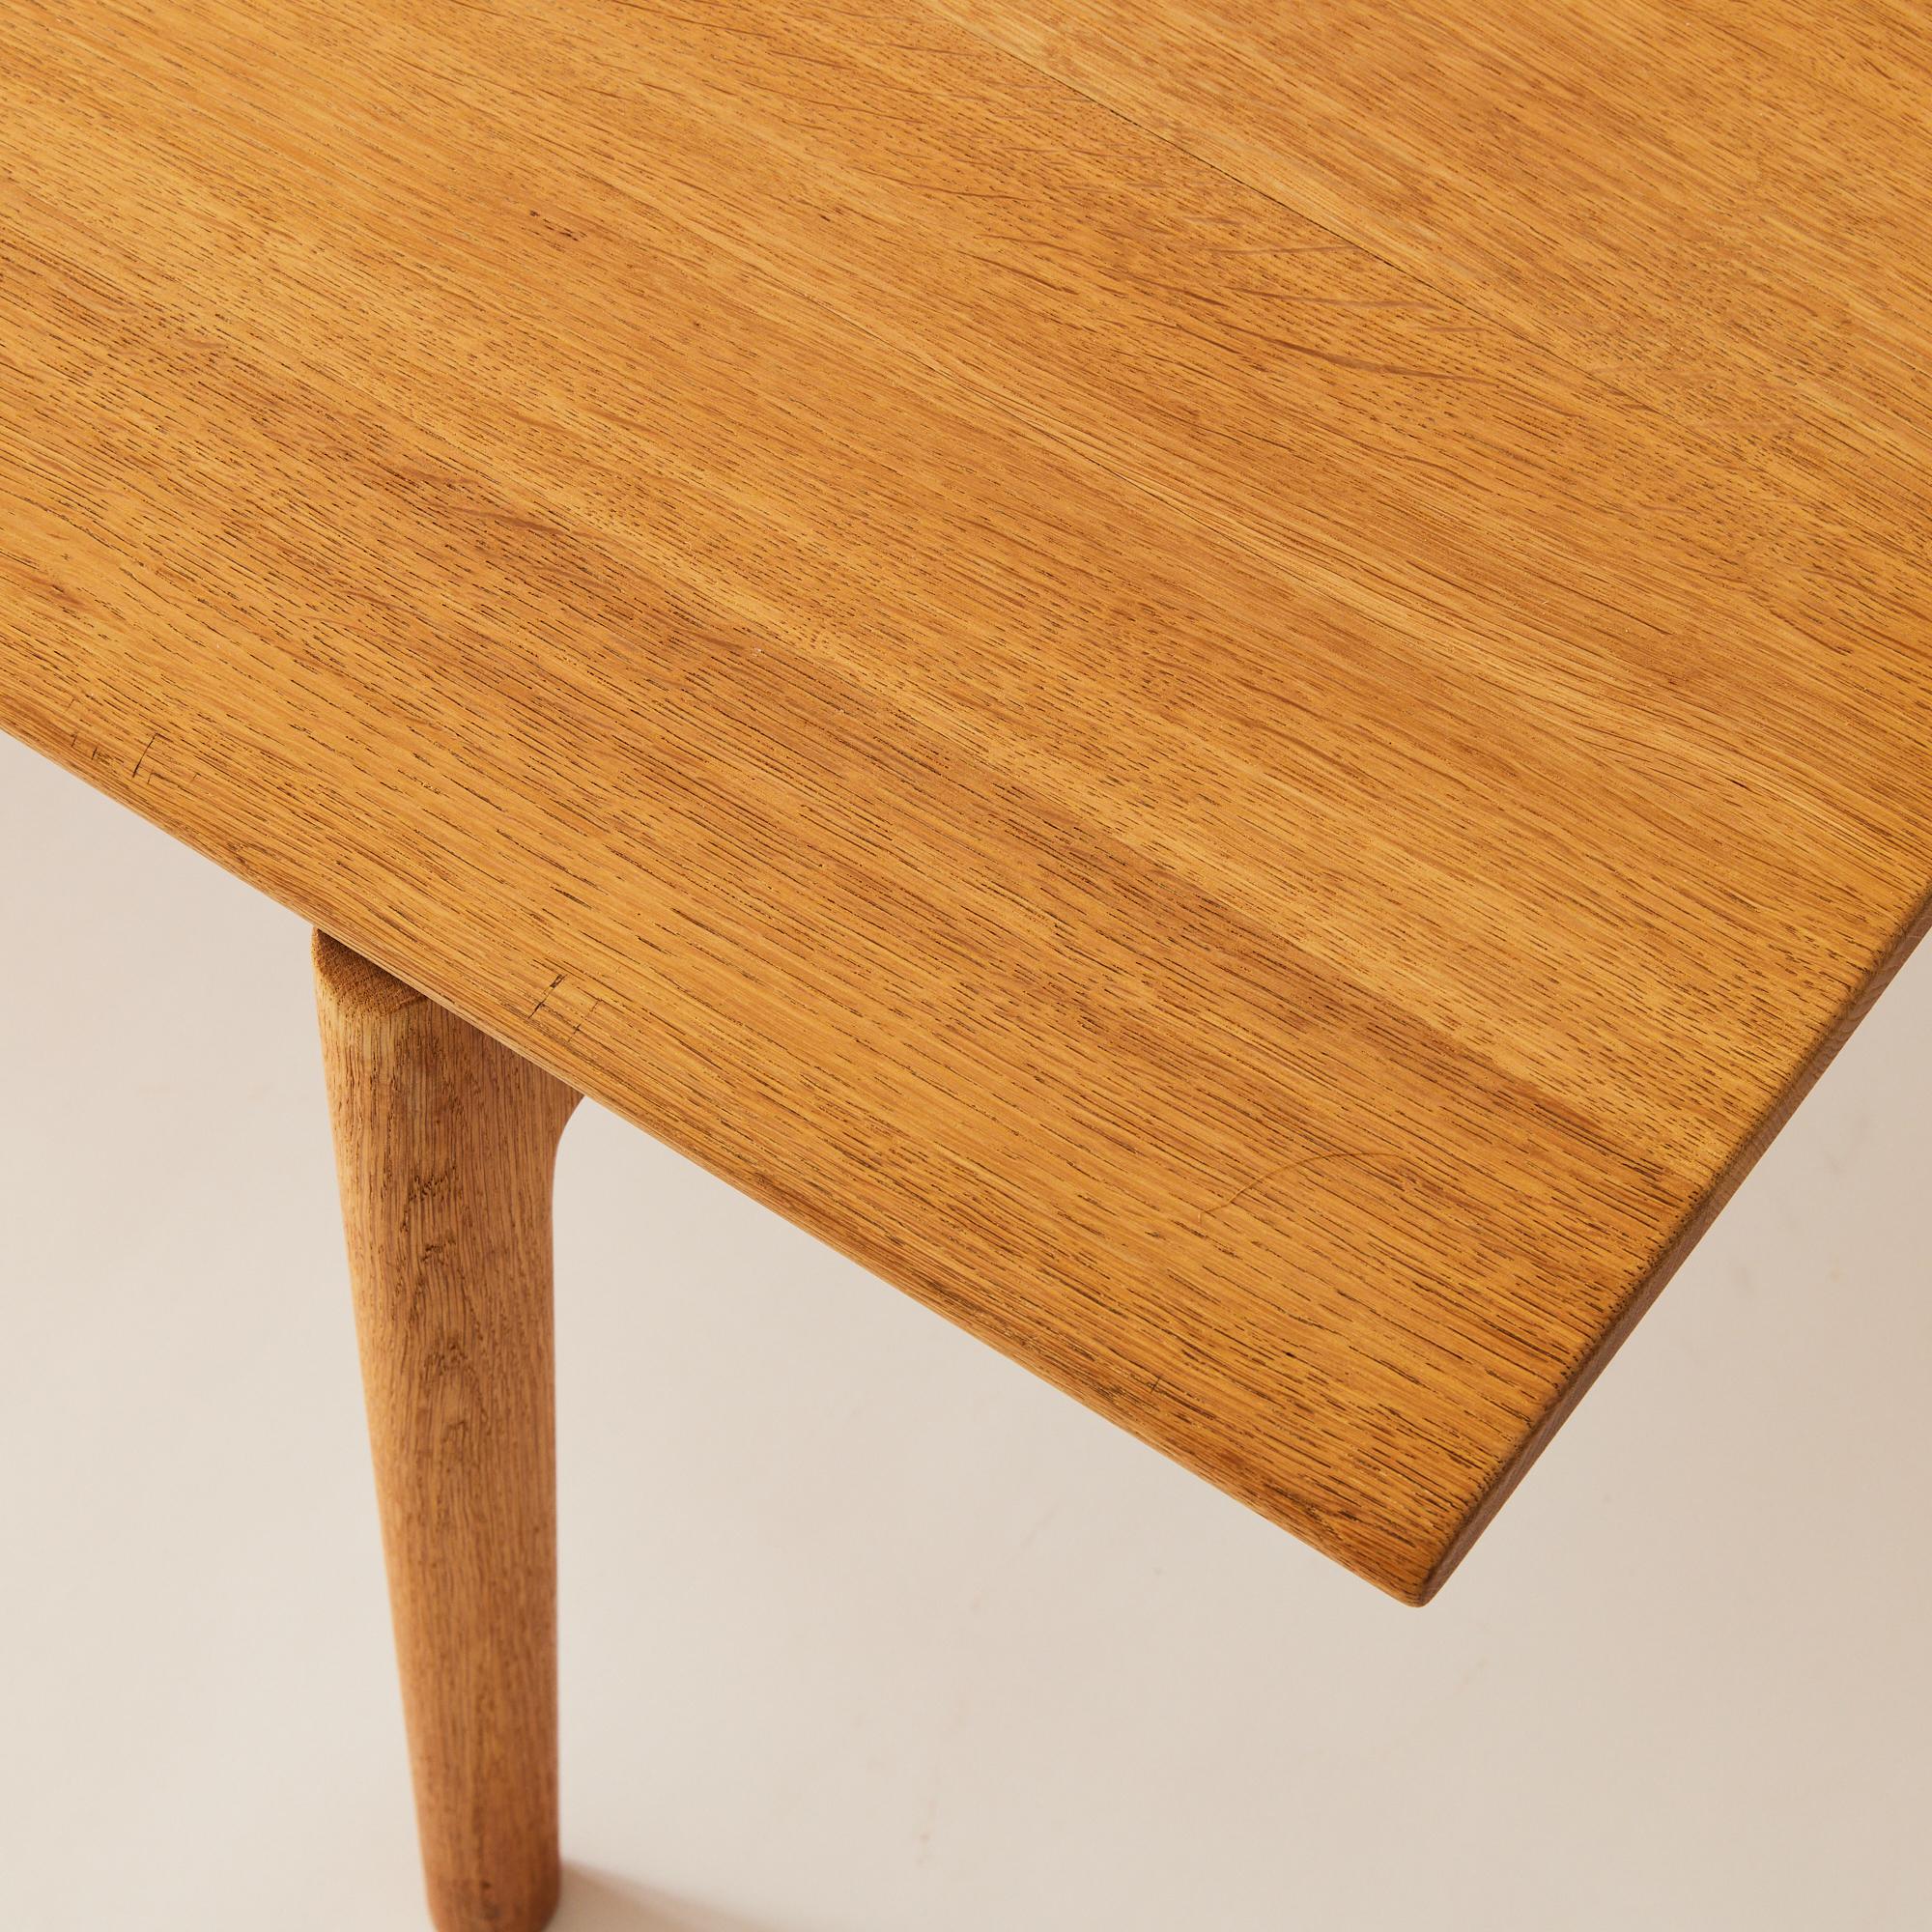 20th Century Hans J. Wegner Solid Oak Coffee Table, Andreas Tuck, 1960's For Sale